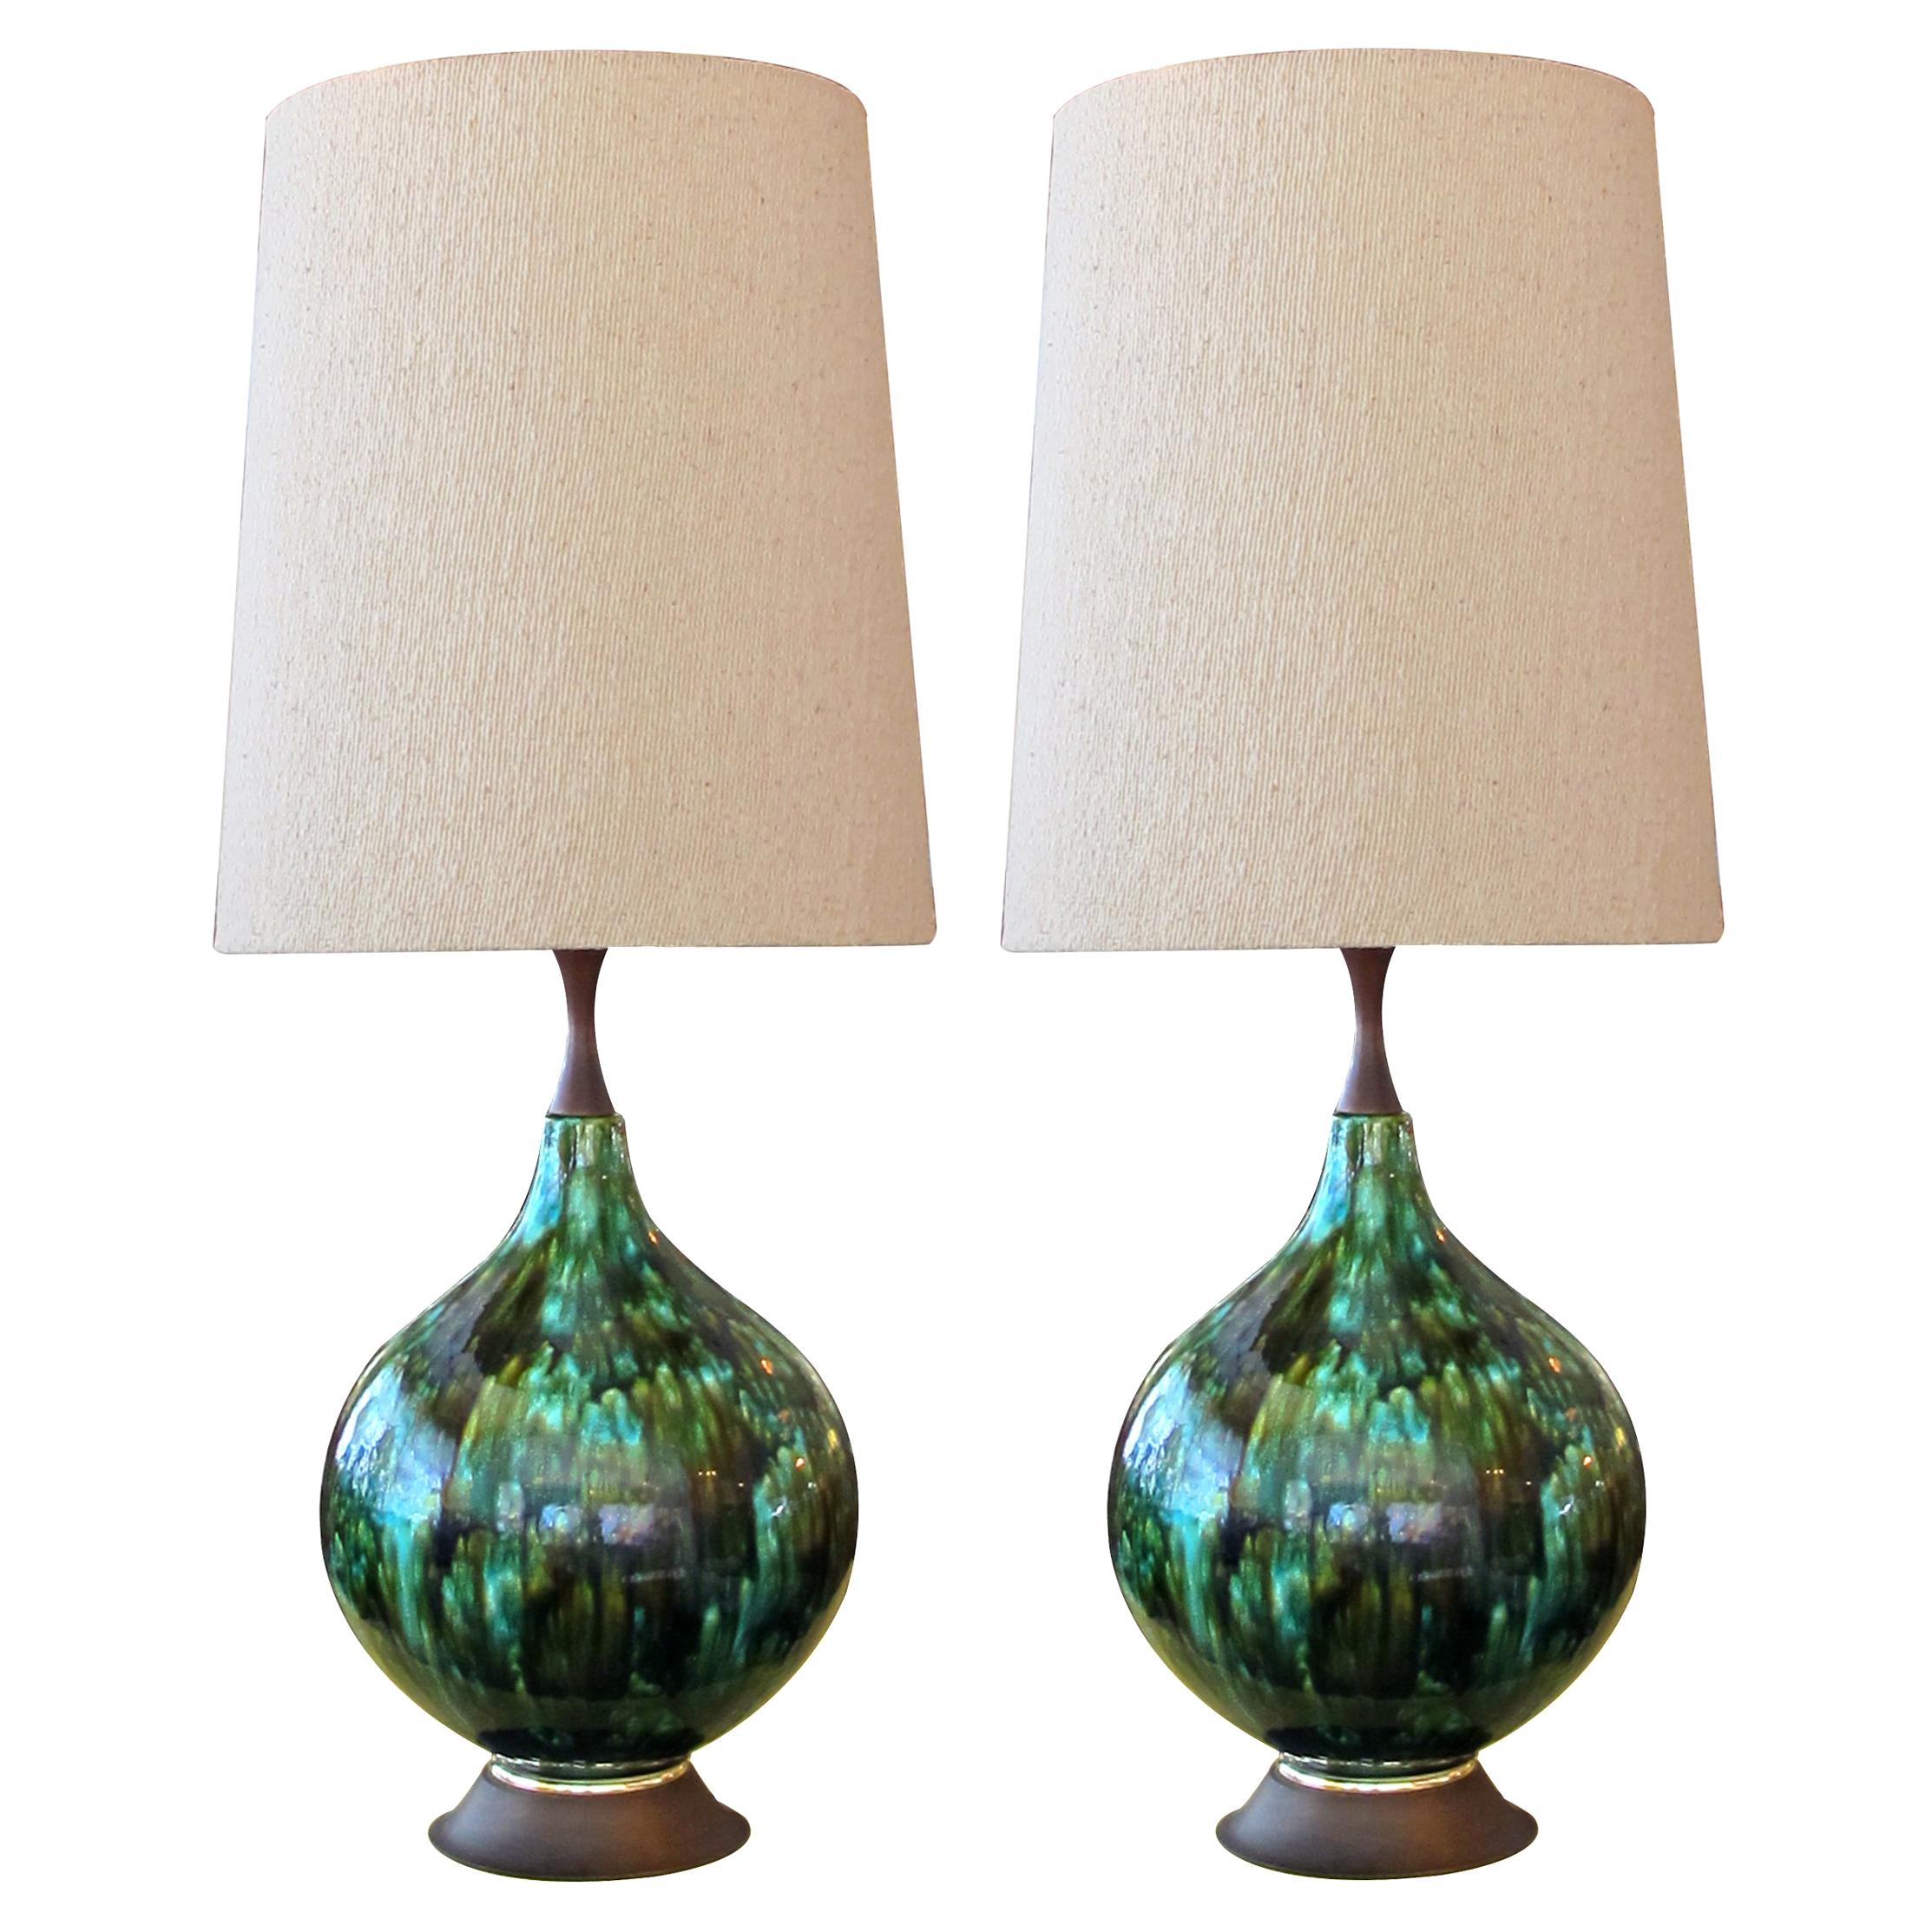 Stunningly Large Pair of American 1960s Olive Green and Teal Drip-Glaze Lamps